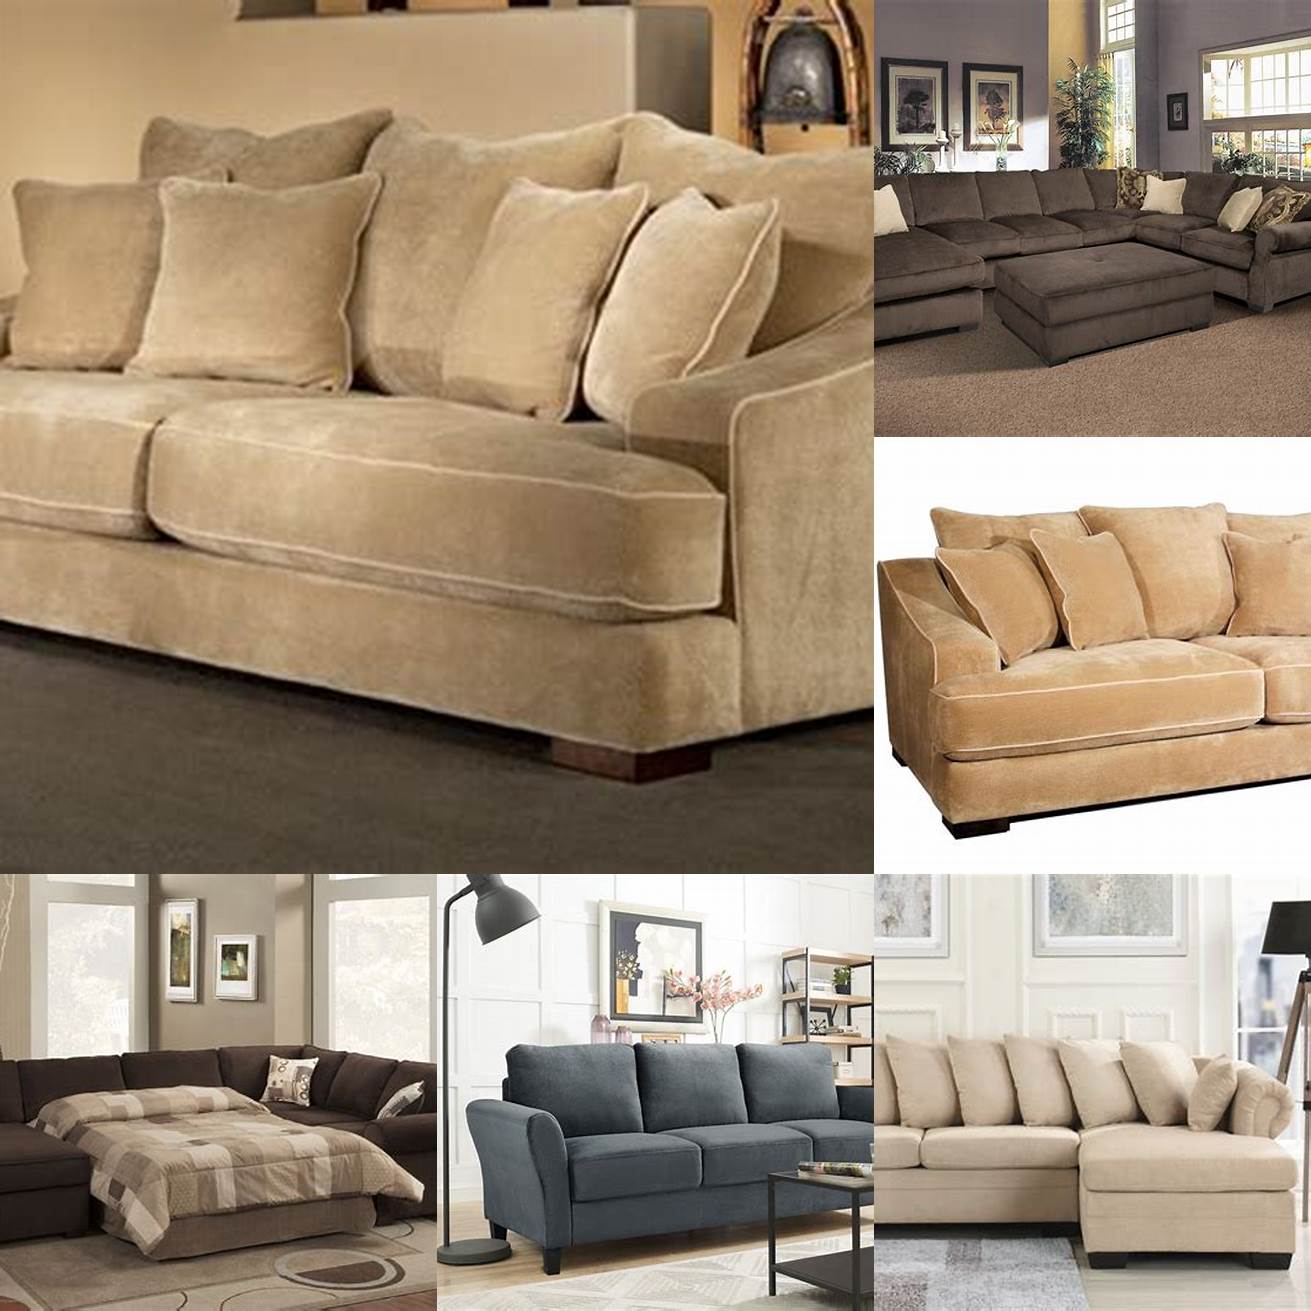 Microfiber Microfiber high back sofas are affordable durable and easy to clean They come in various colors from light cream and beige to dark brown and black